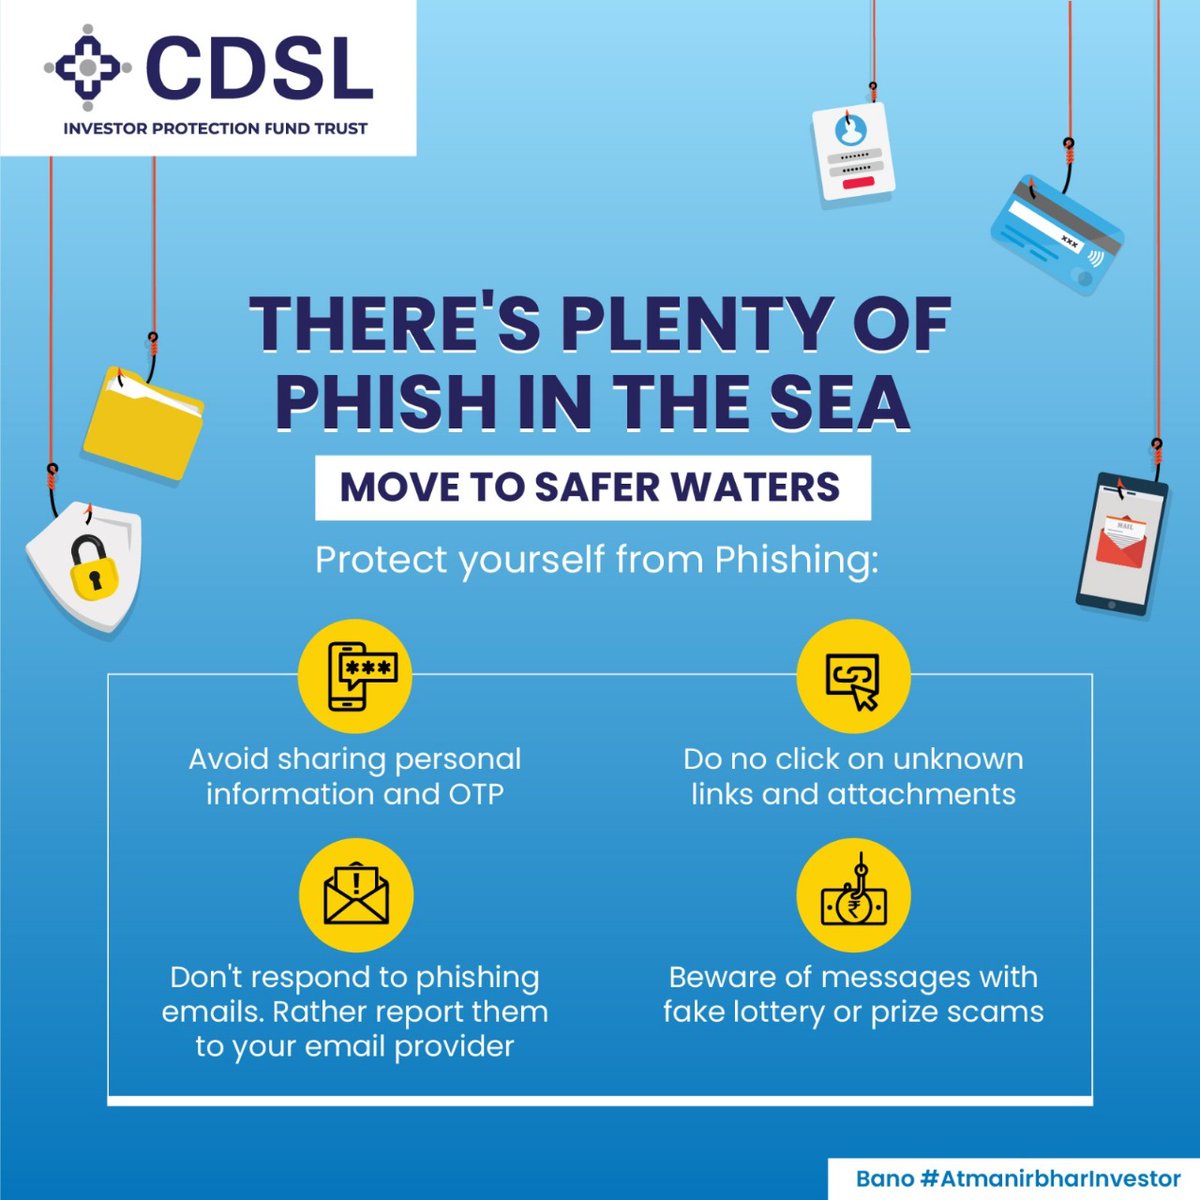 Phishing is the practice of obtaining your personal information through fraudulent means. 

Stay updated and vigilant to keep yourself and your loved ones protected from Phishing attack.

#Phishing #PhishingAttack #PhishingAlert #StaySafeOnline #OnlineSafety #CyberSafety